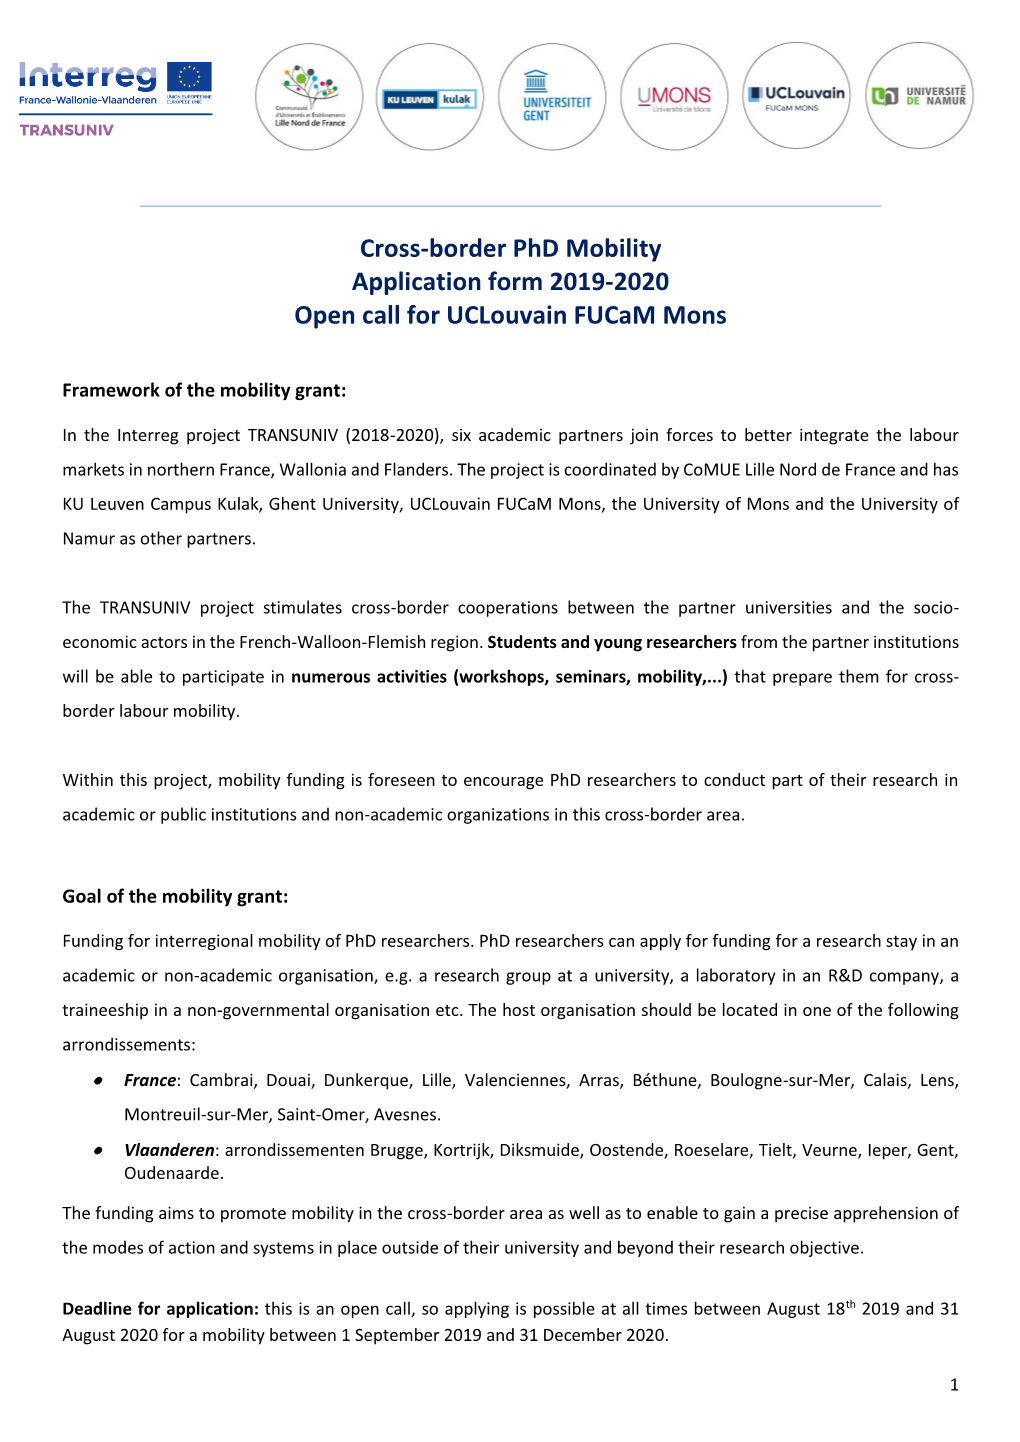 Cross-Border Phd Mobility Application Form 2019-2020 Open Call for Uclouvain Fucam Mons